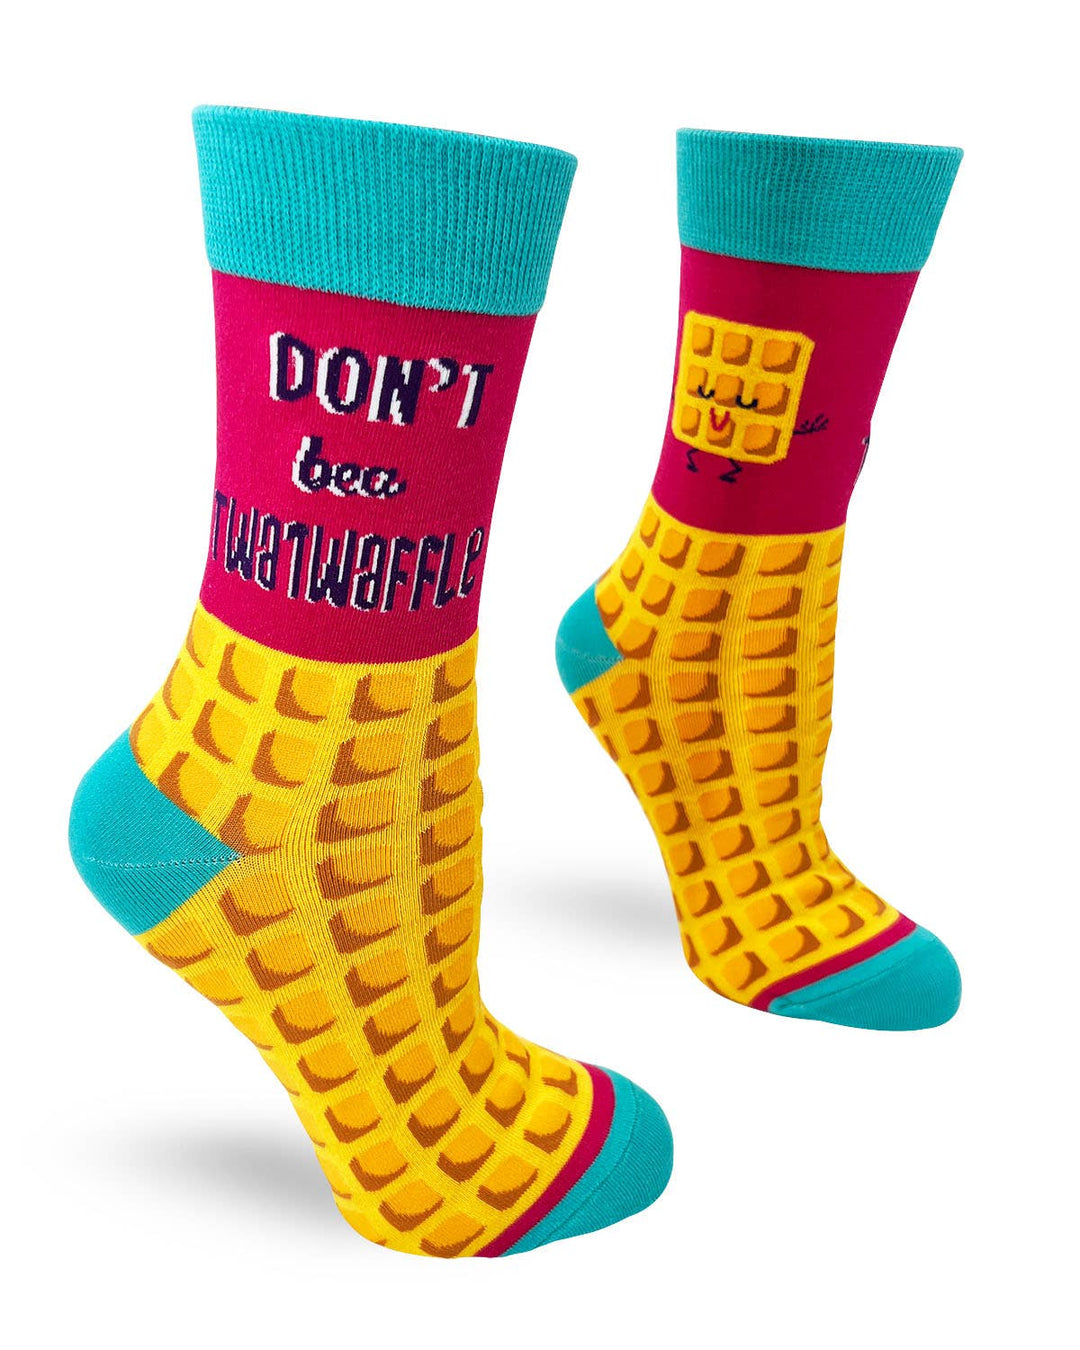 Fabdaz - Funny ladies' crew socks with saying "Don't Be a Twatwaffle"